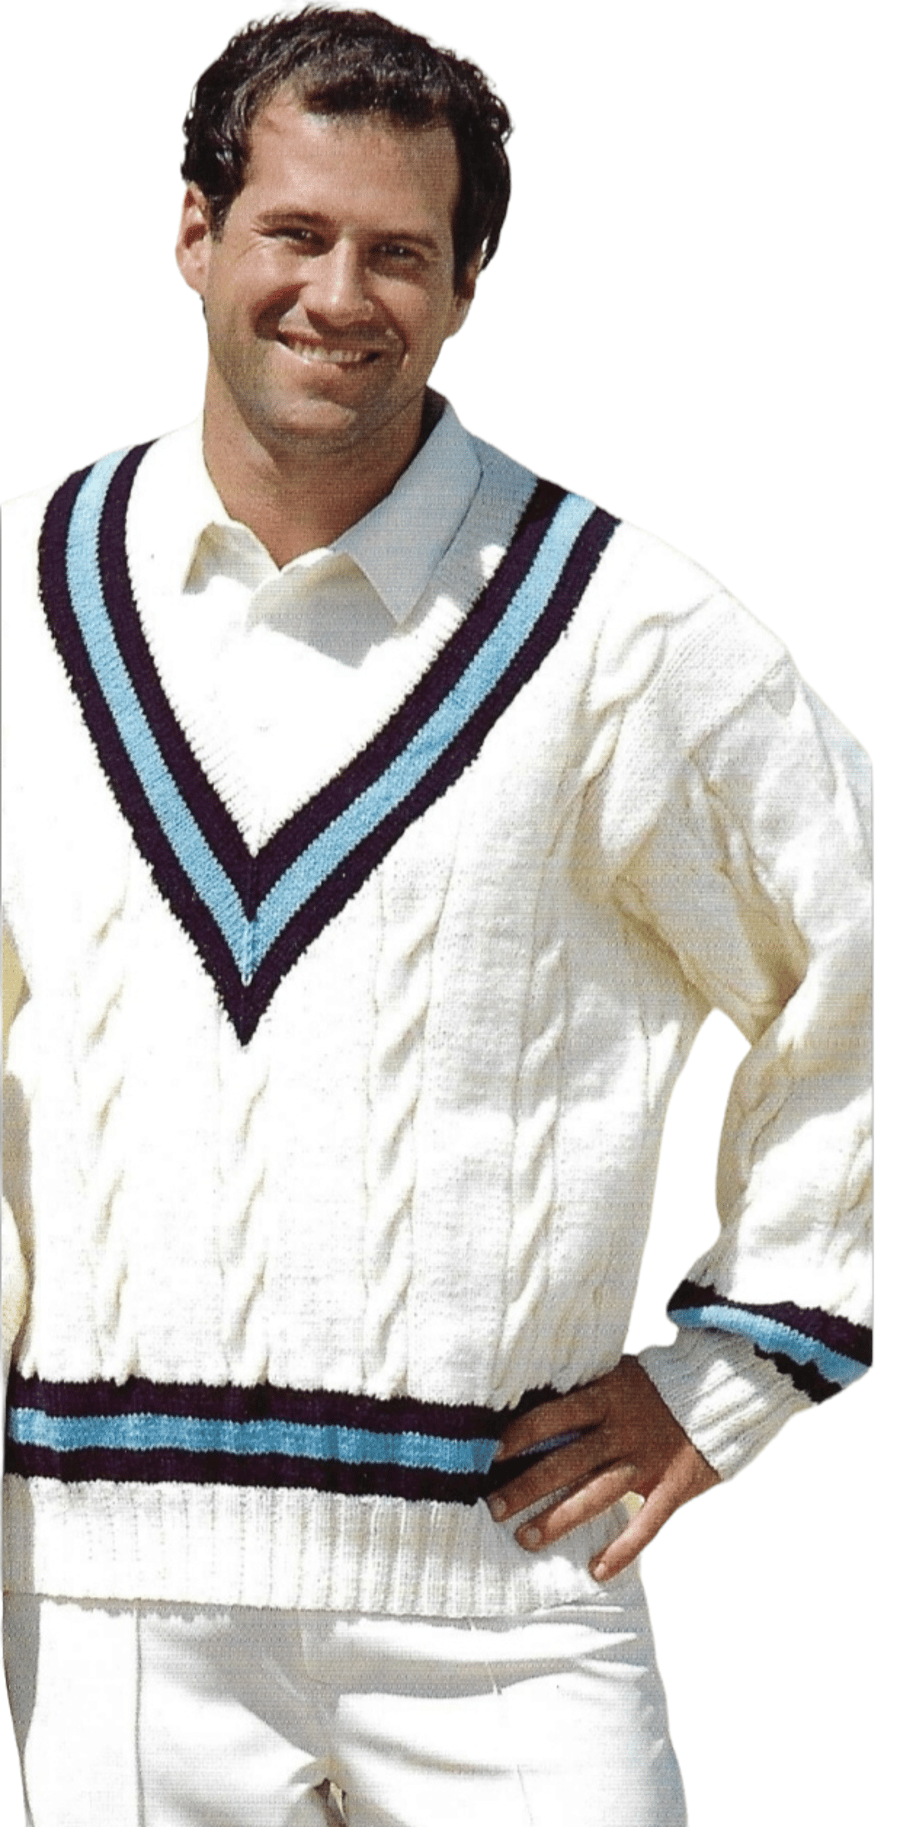 Hand knit Aran weight cream cricket sweater with traditional blue & navy detail